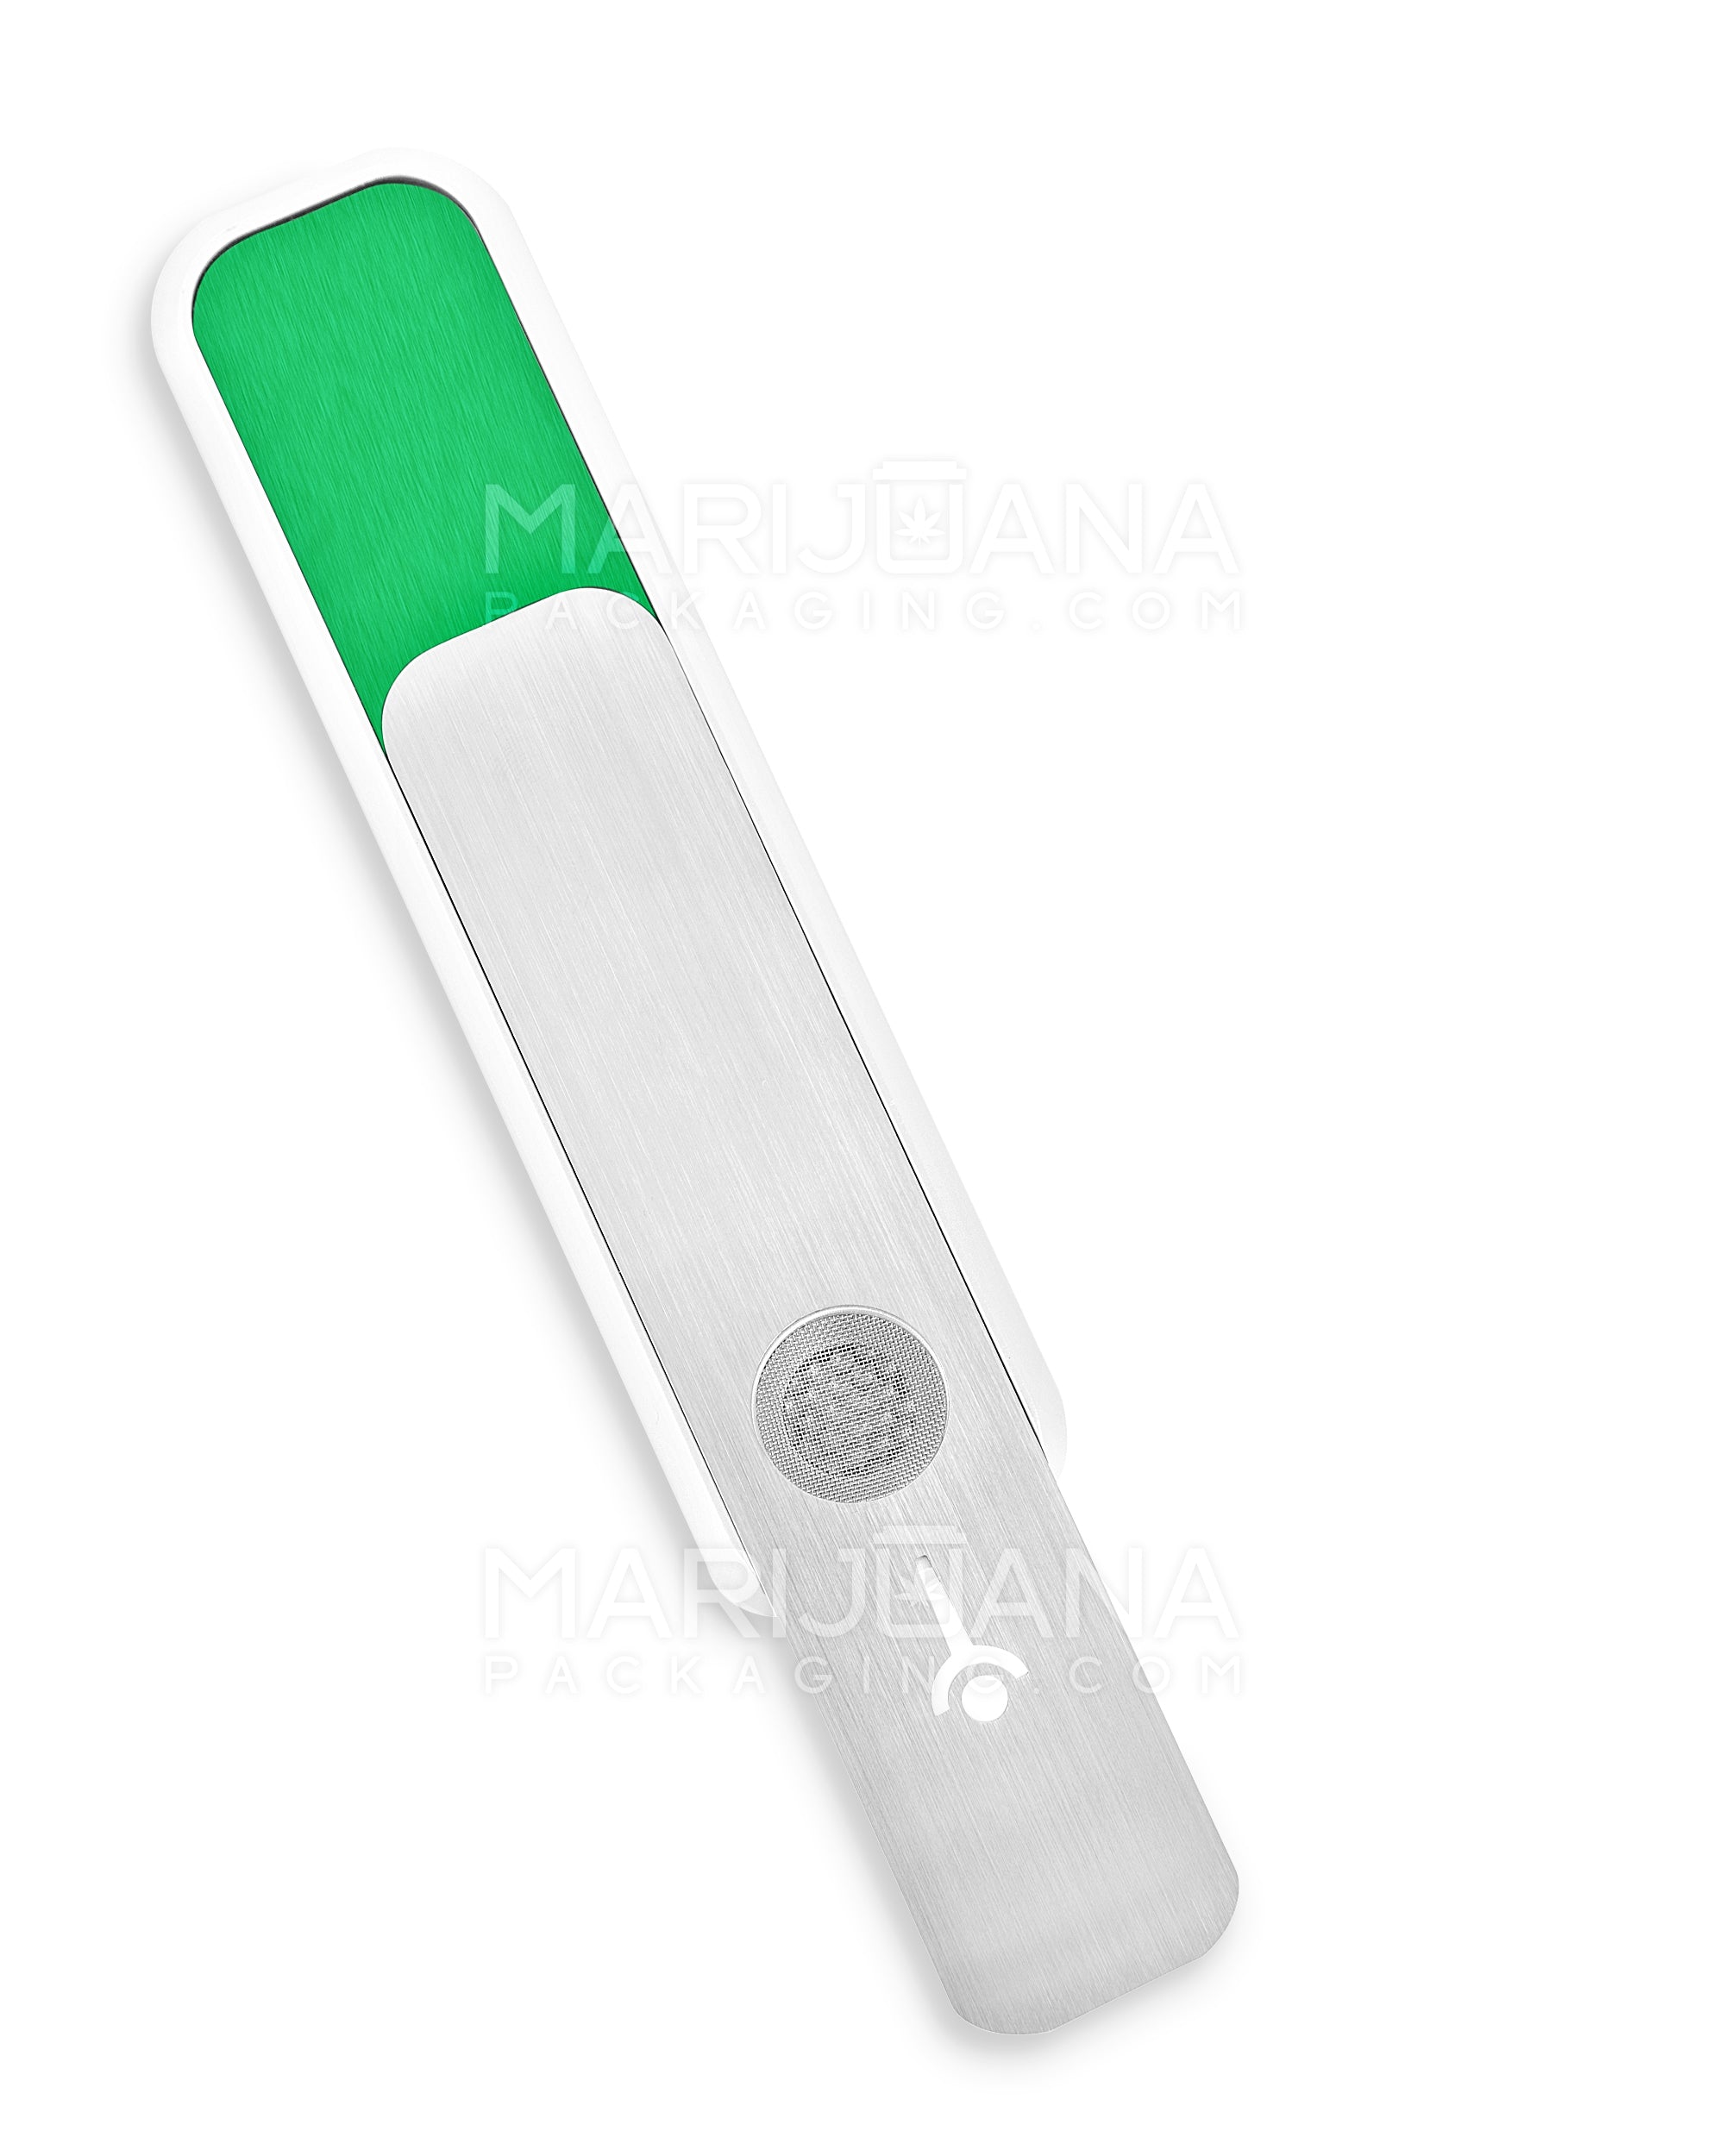 GENIUS PIPE | Classic Color Liberation Magnetic Slider Pipe w/ Silver Slider | 6in Long - Metal - Silver & Green - 4